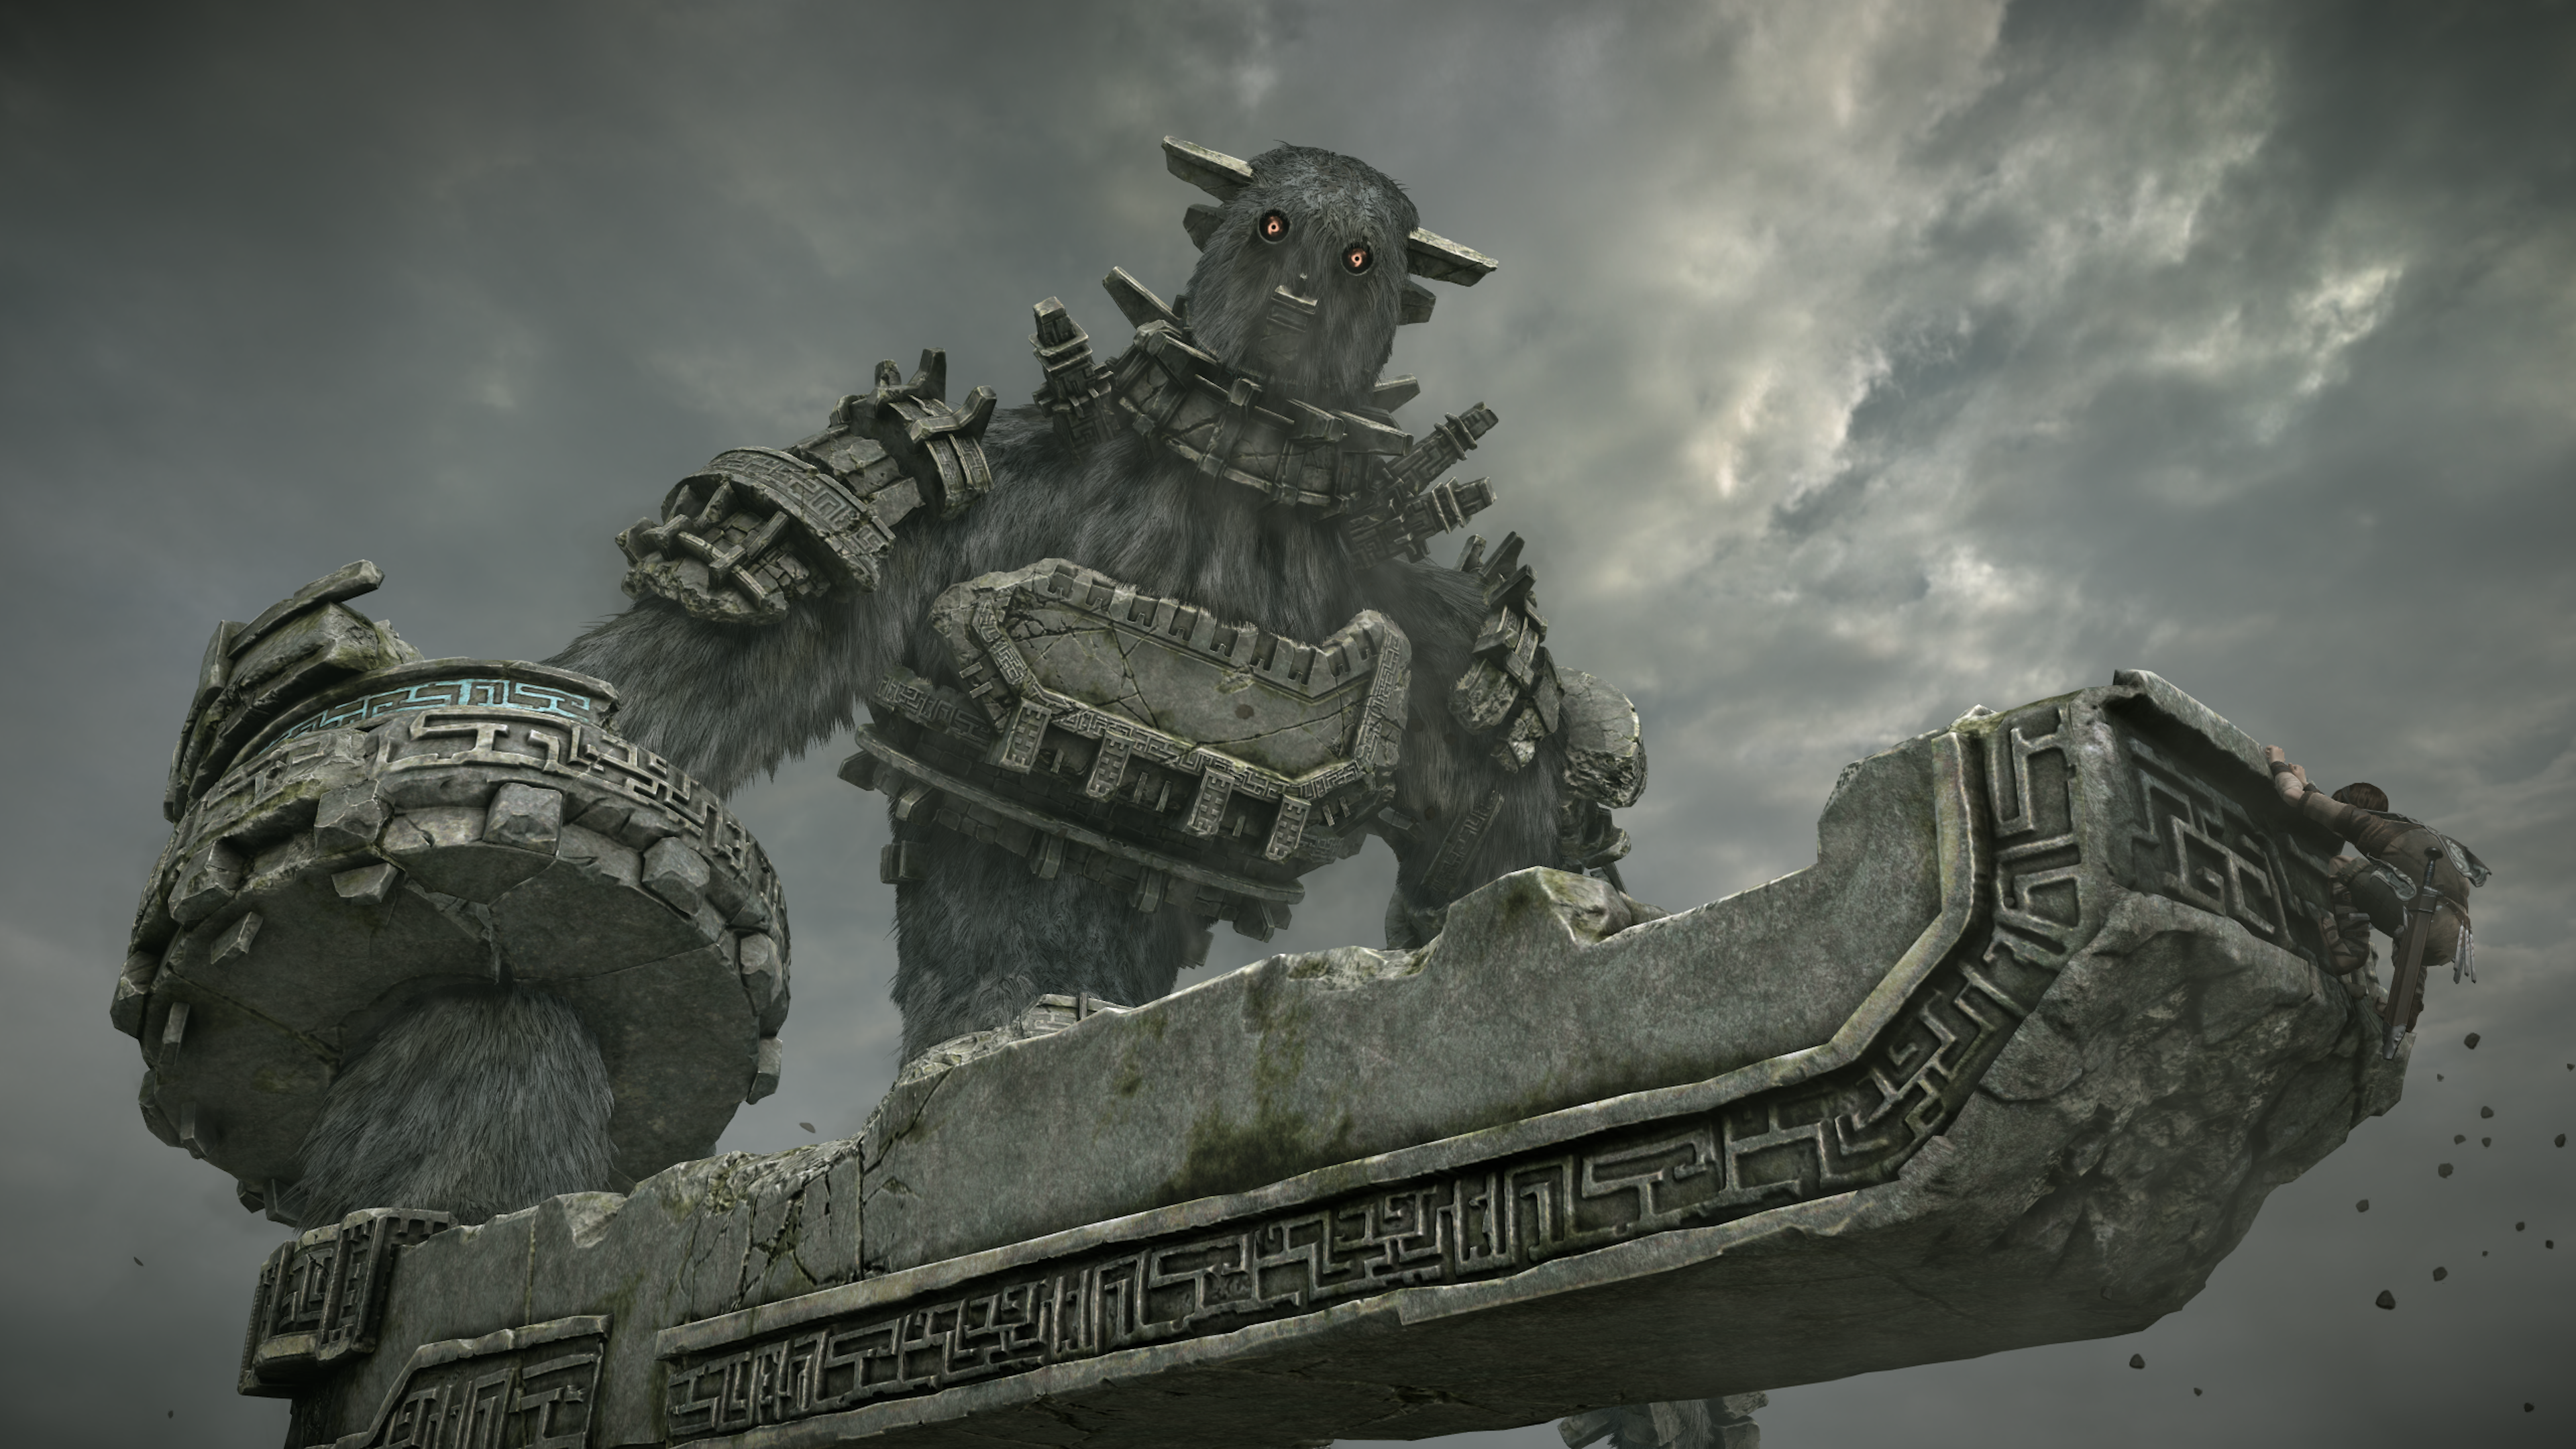 Watch one of the best boss fights from the Shadow of the Colossus